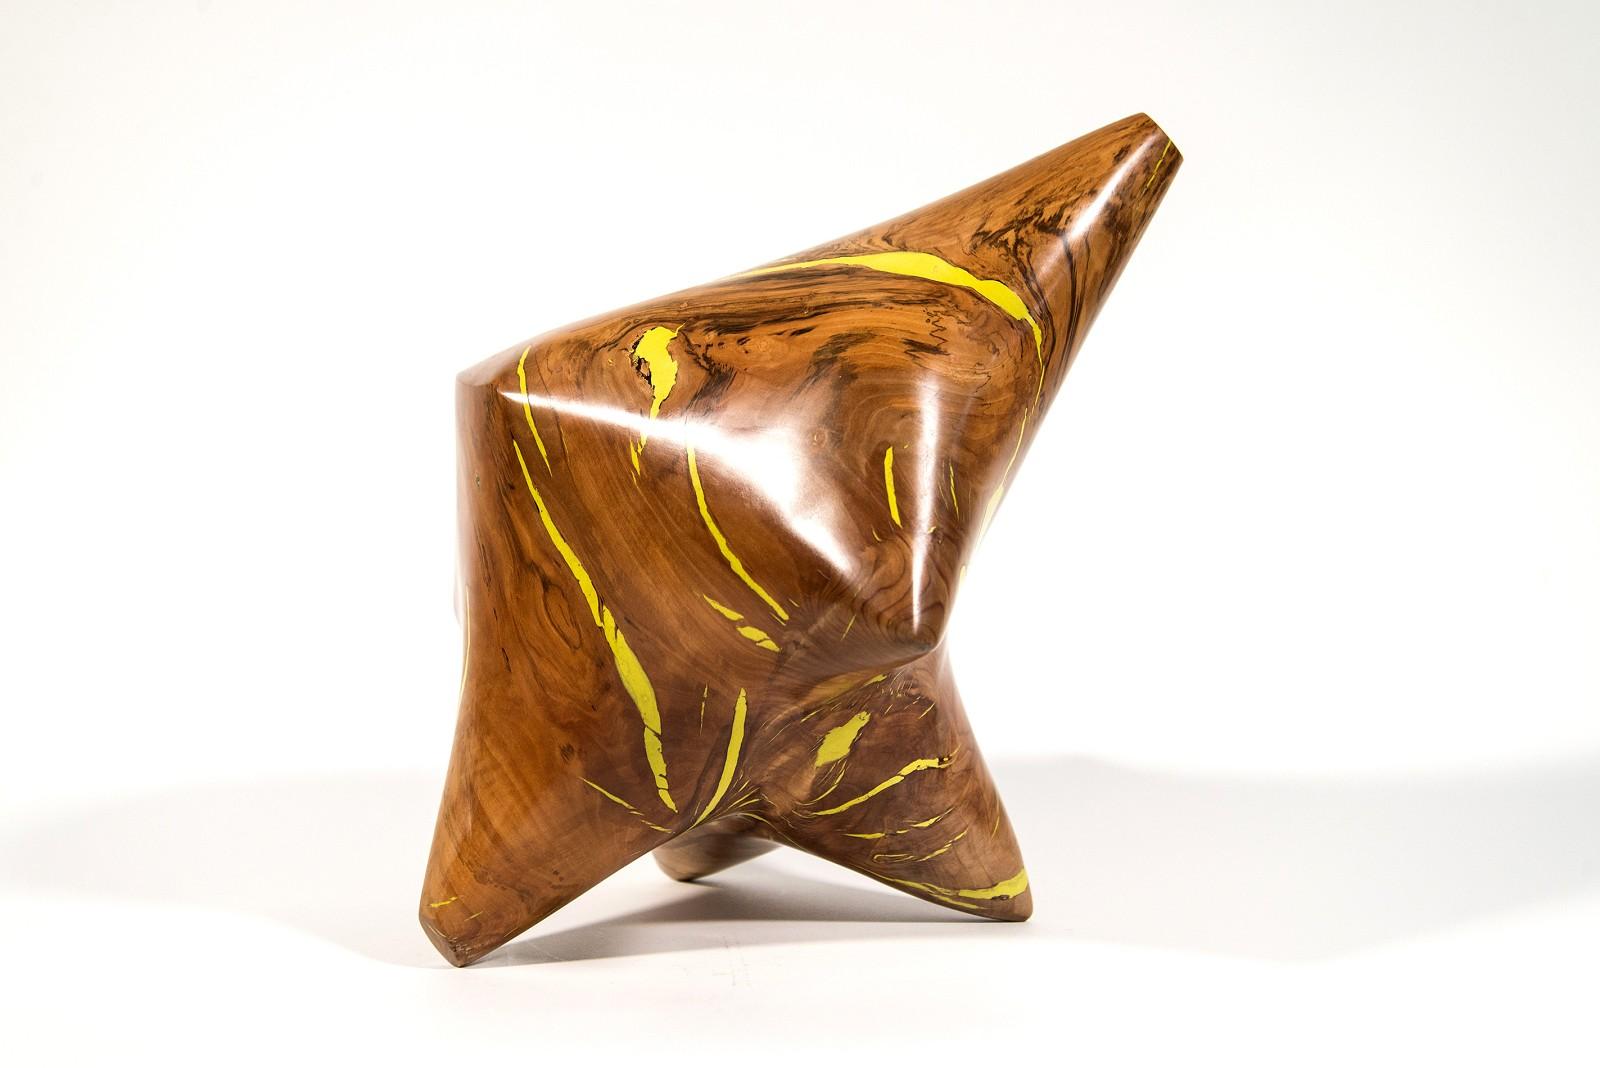 Shayne Dark Abstract Sculpture - Windfall Series II No 7 - smooth, carved, abstract, Applewood & resin sculpture